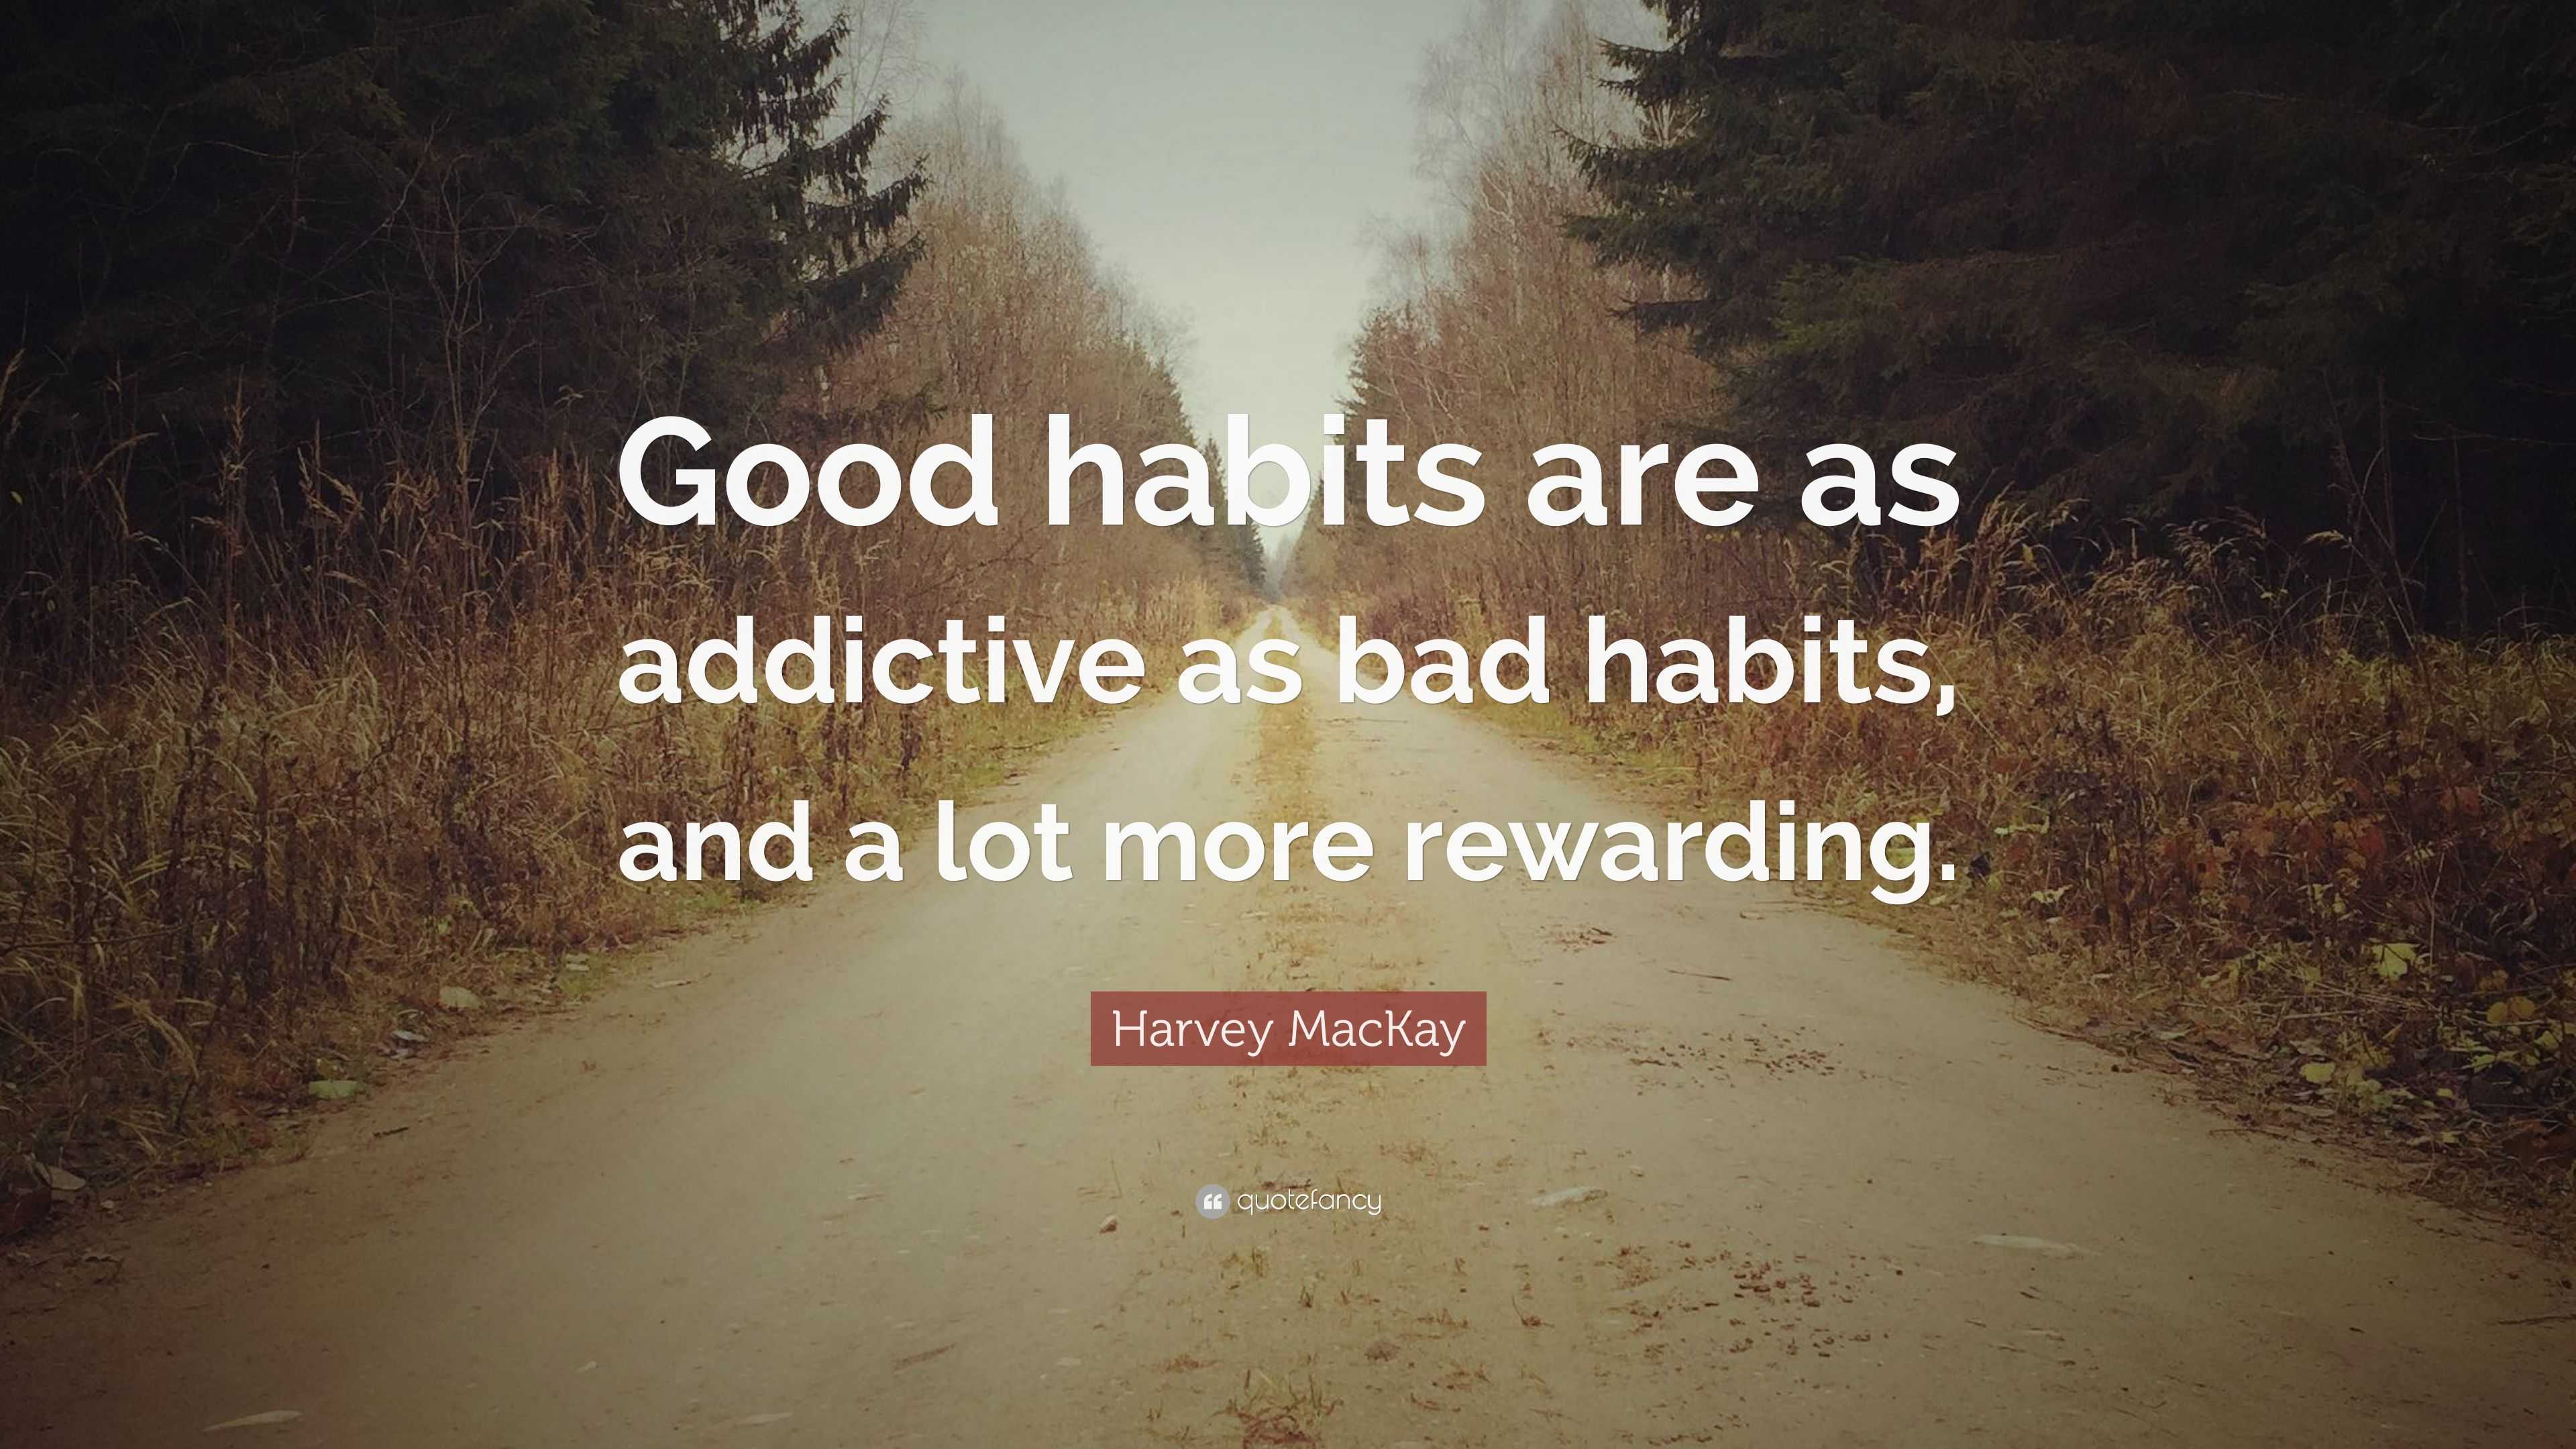 Harvey MacKay Quote: “Good habits are as addictive as bad habits, and a